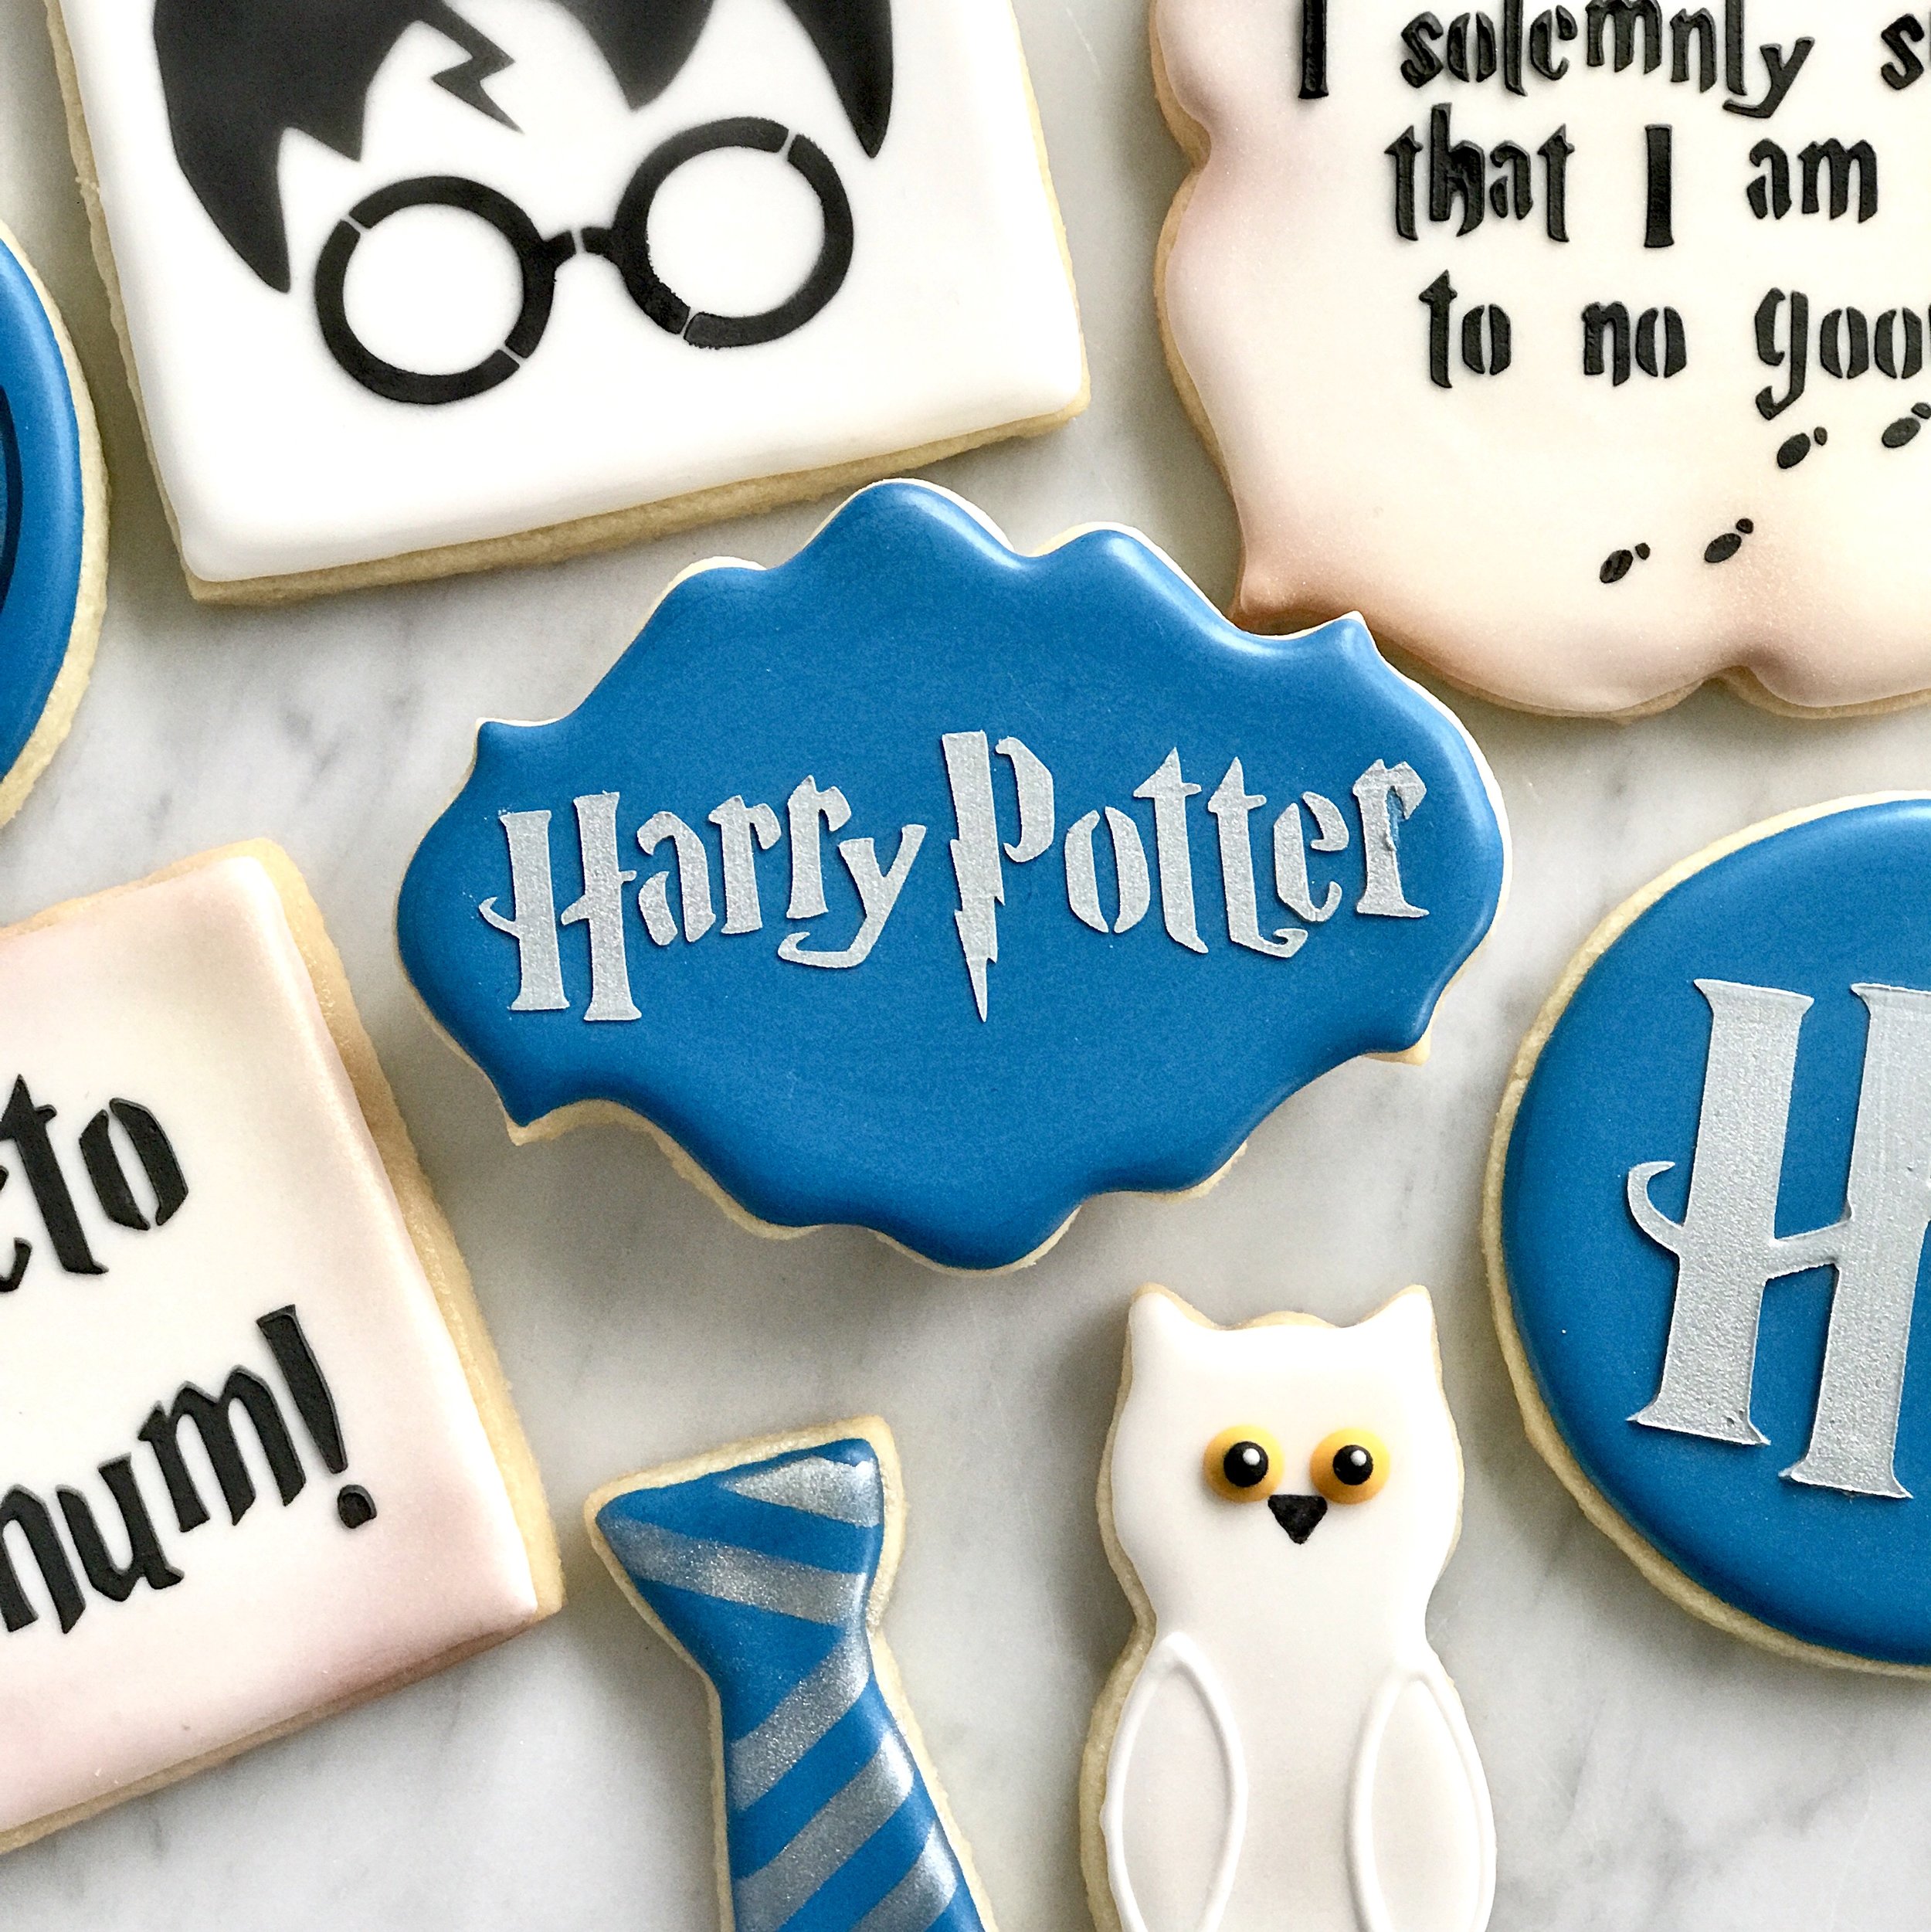 Harry Potter cookie cutters that will make even muggle bakers look good.